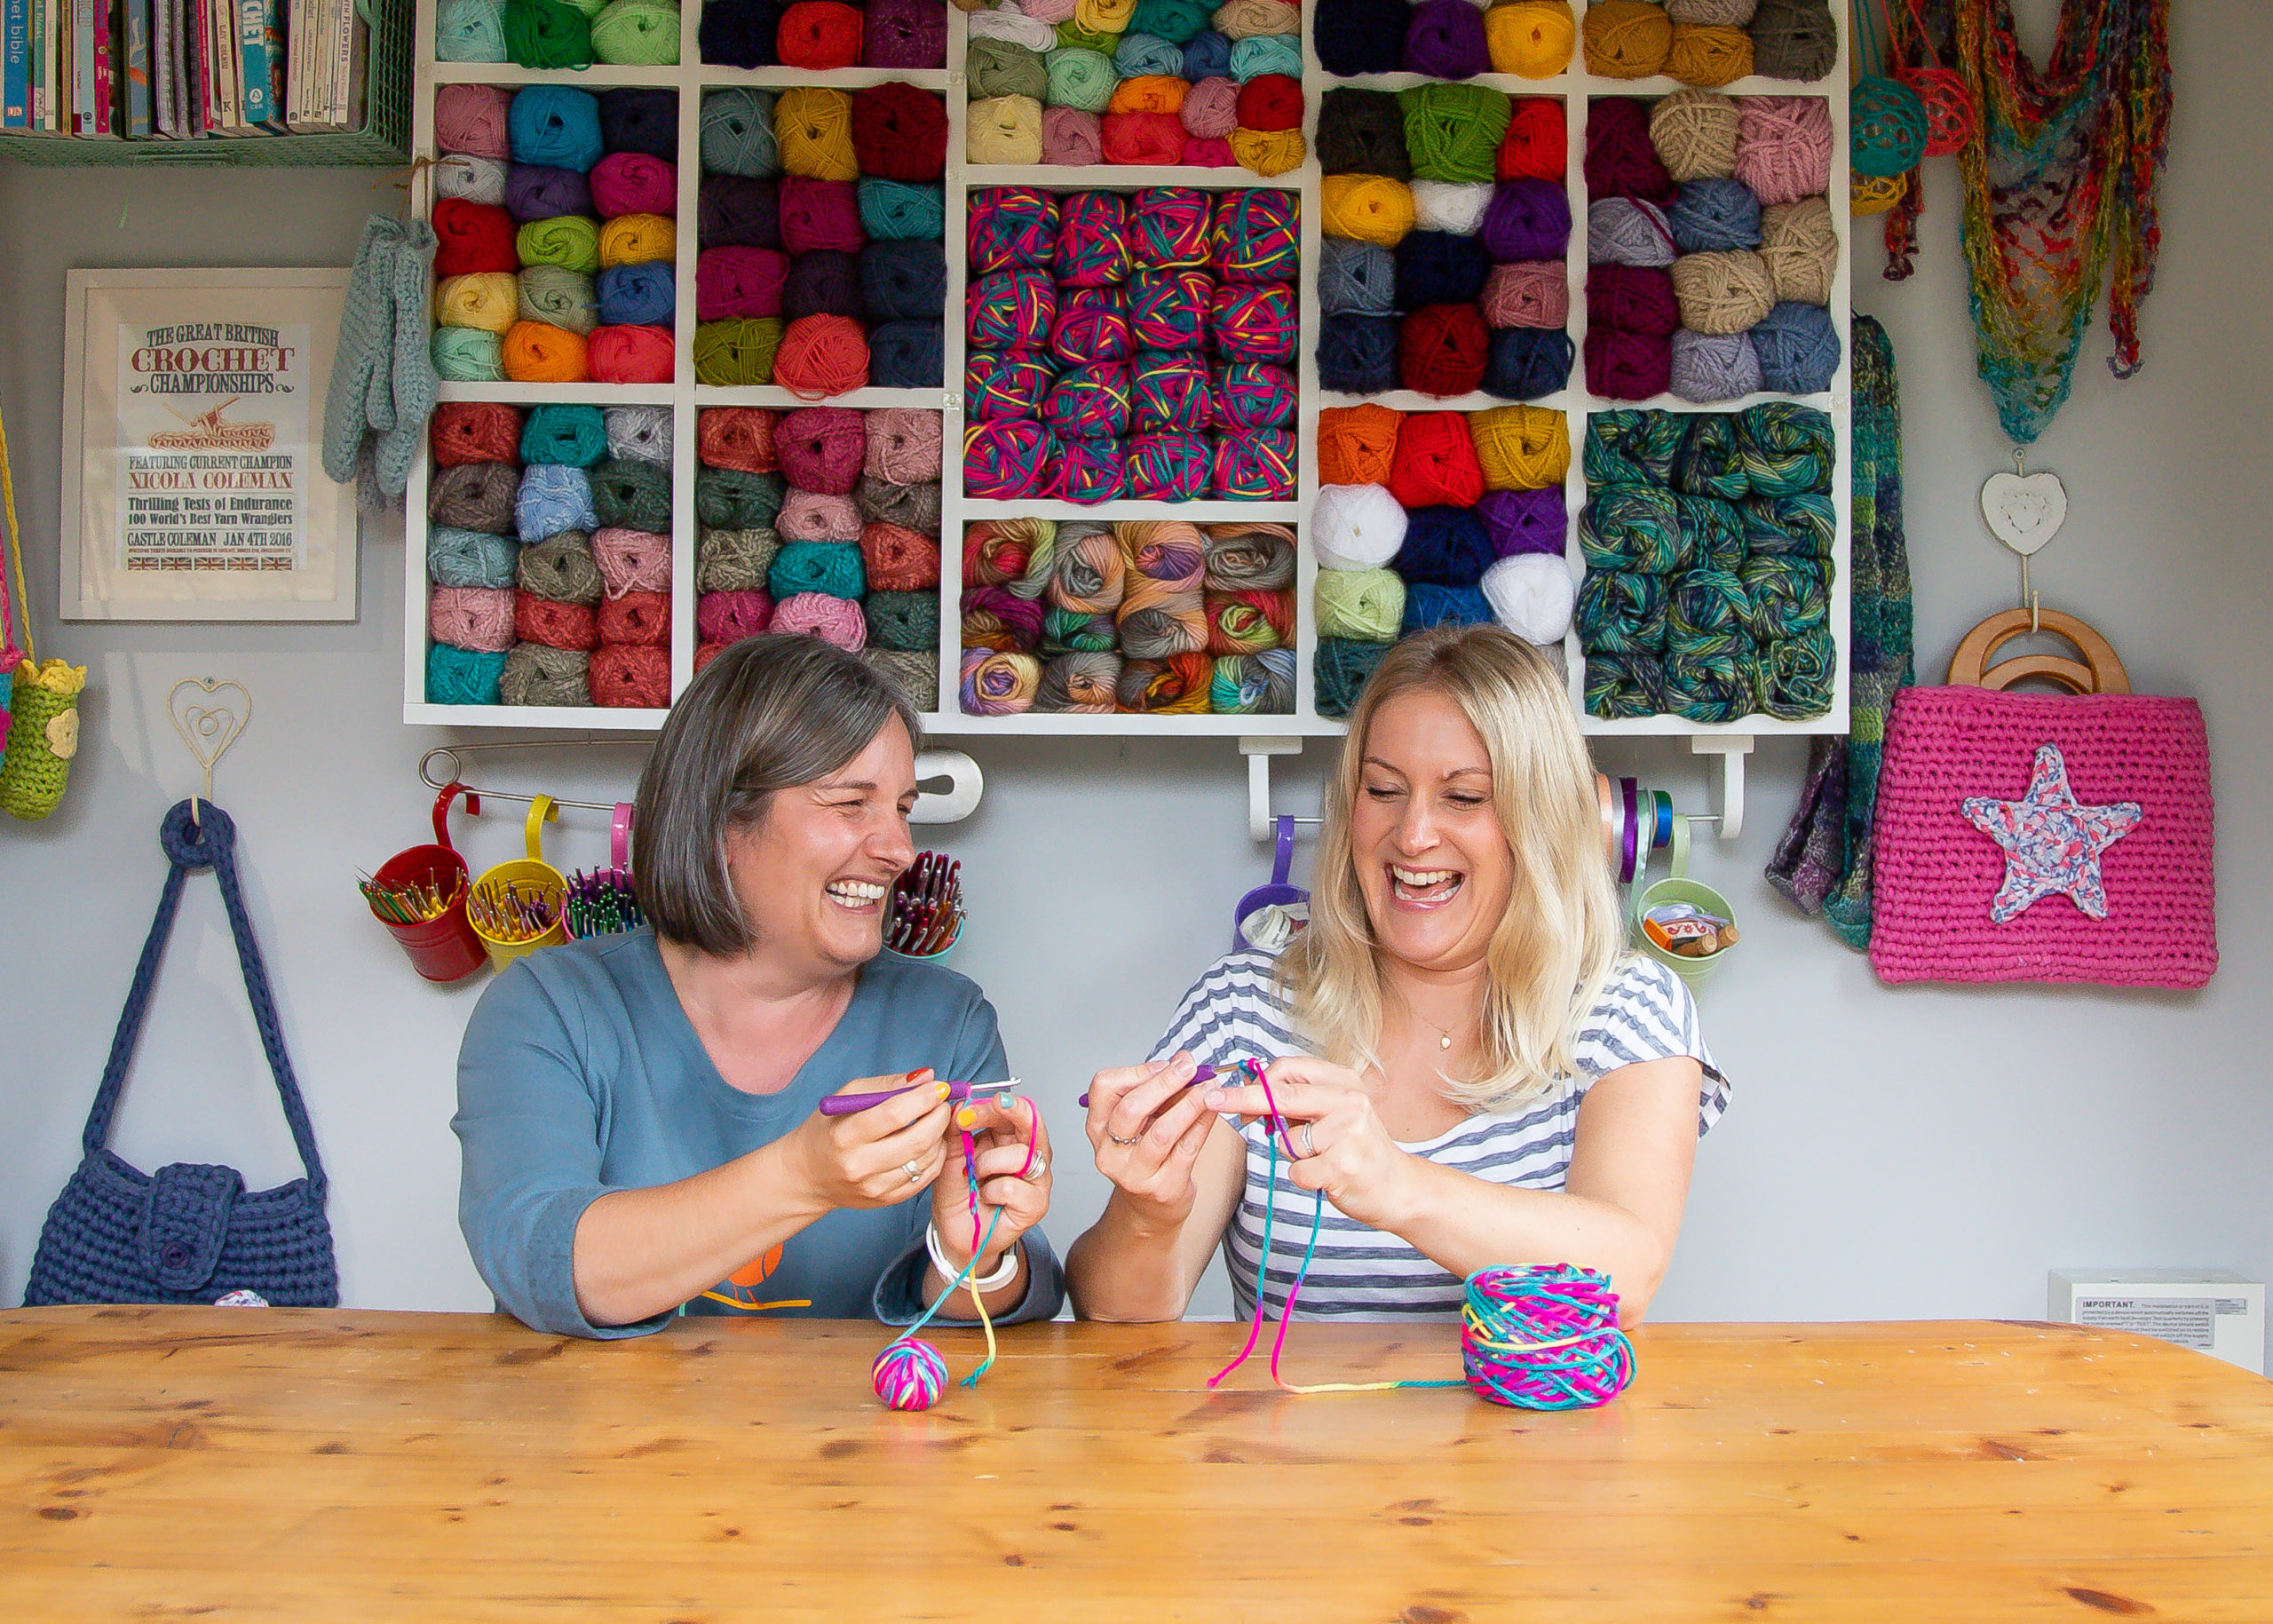 Learning to crochet with The Secret Crocheter